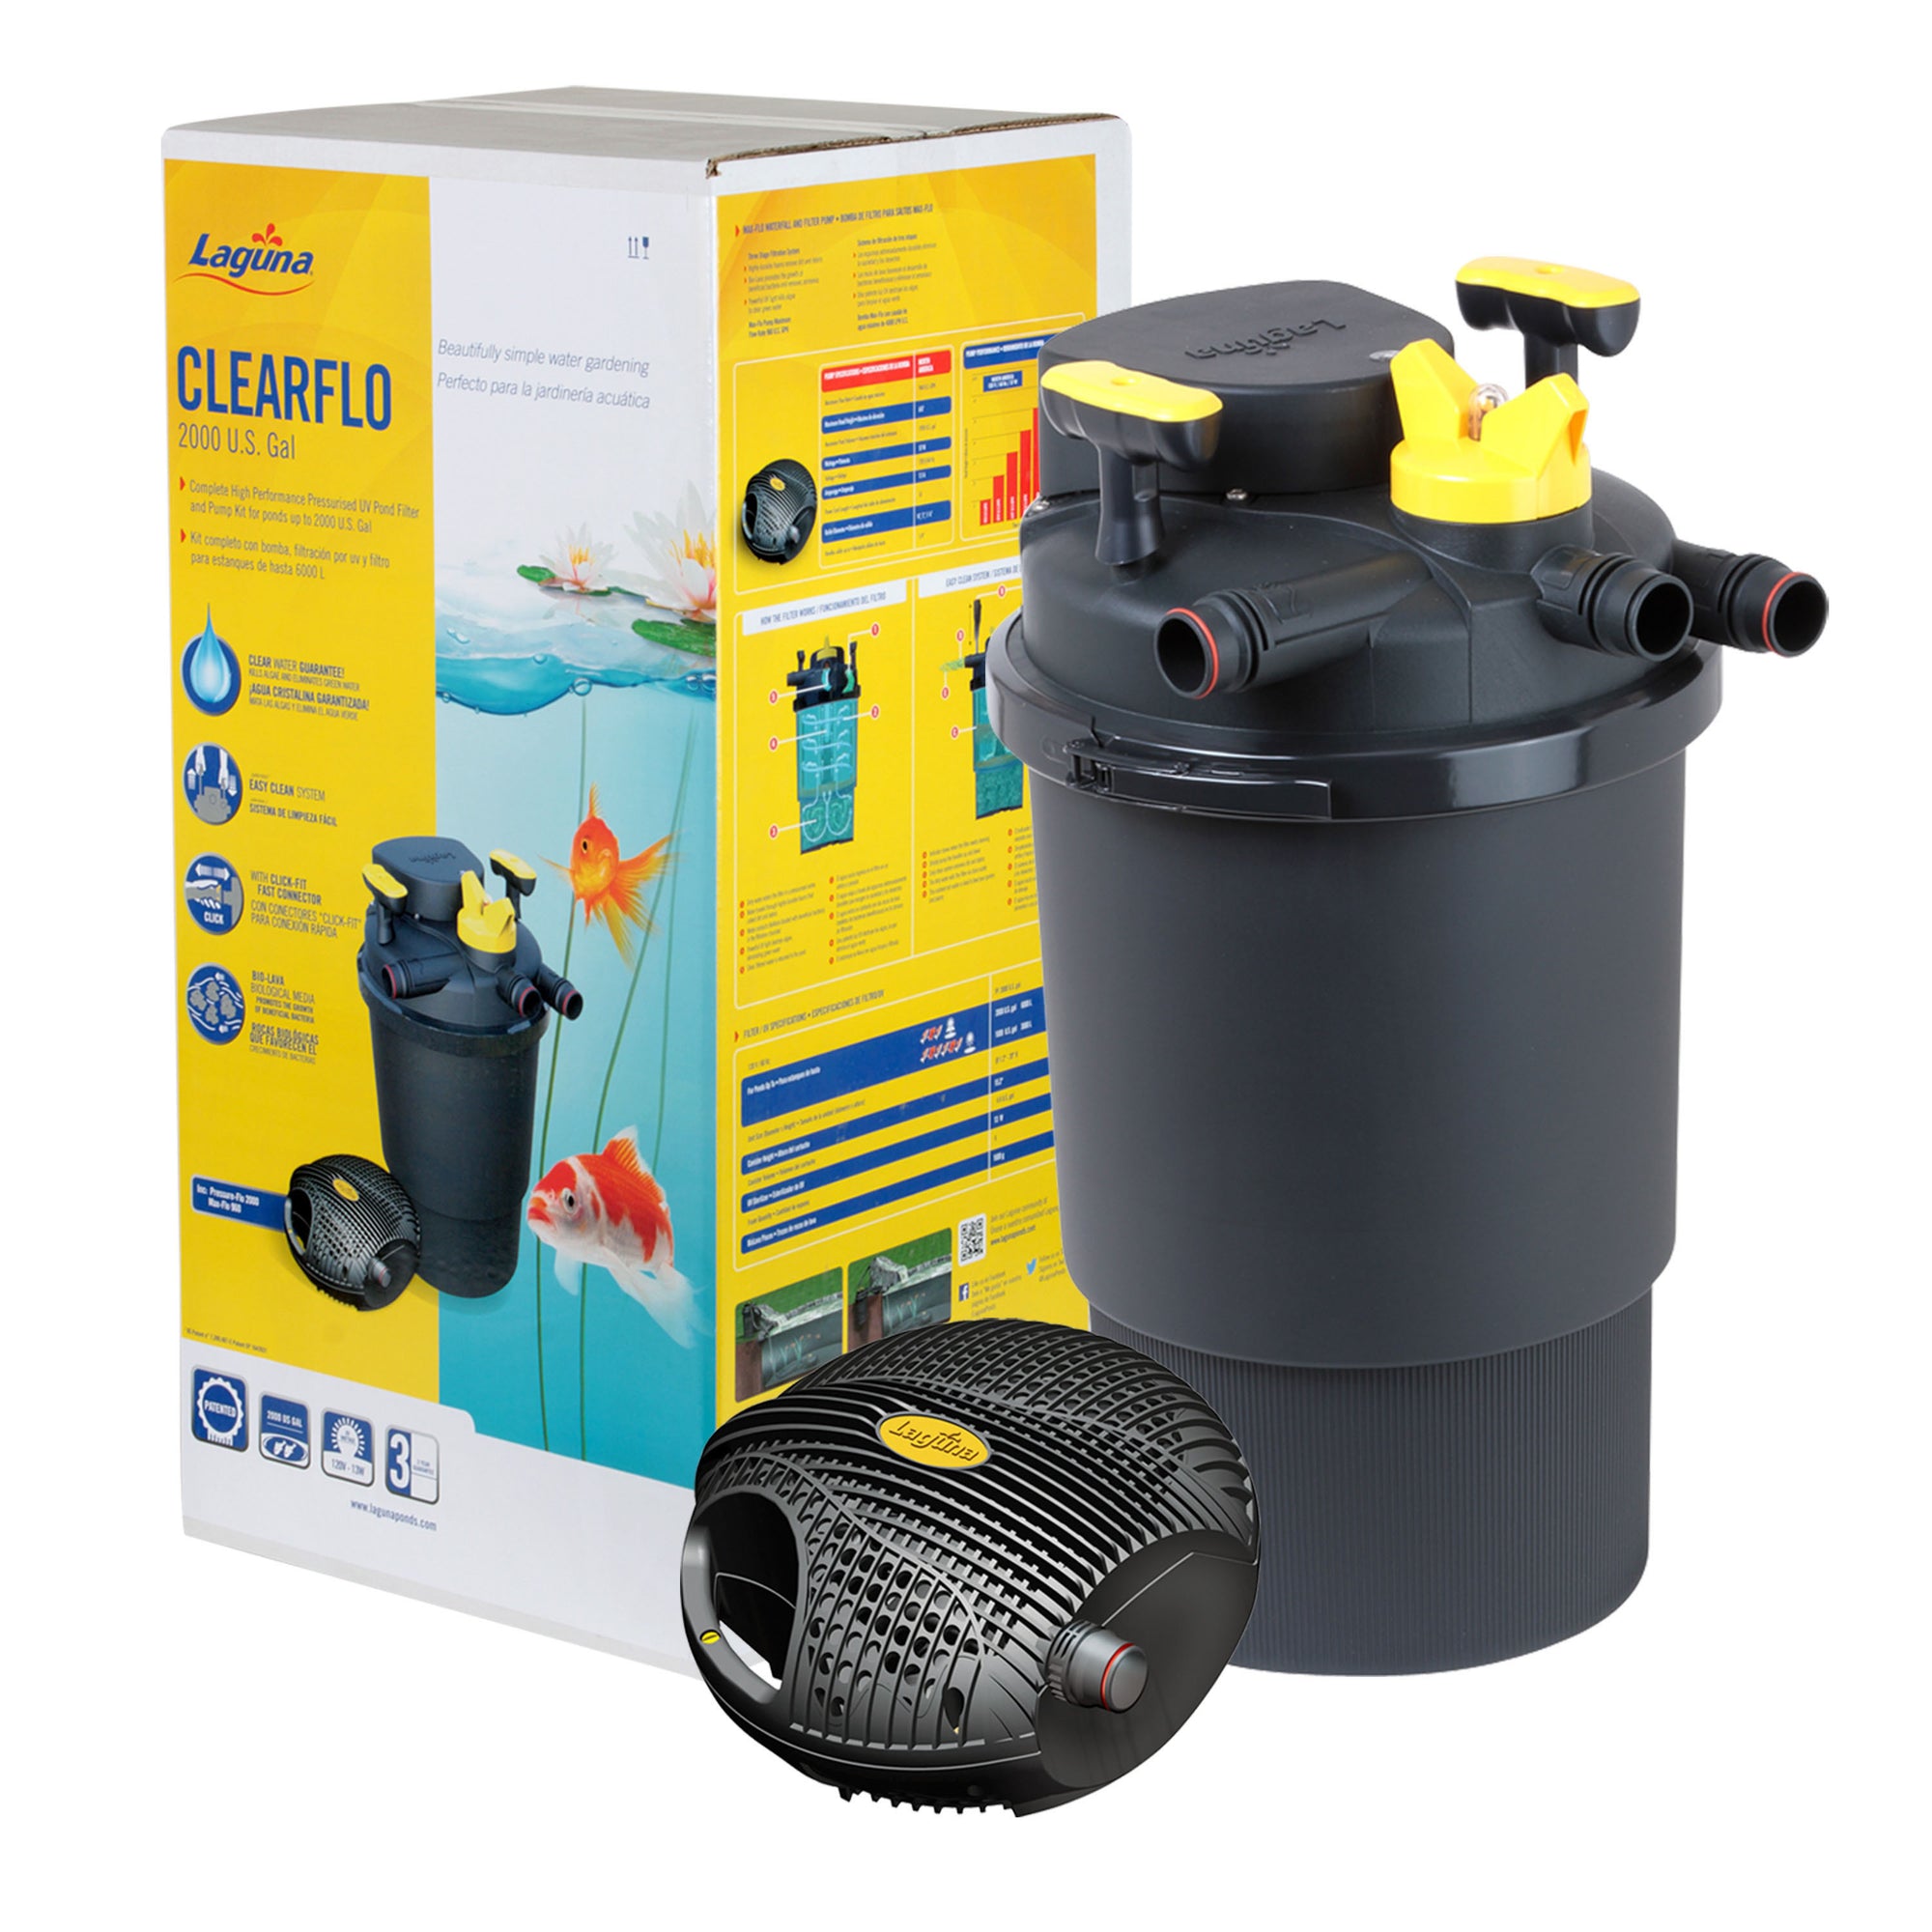 Laguna ClearFlo 2000 Complete Pump, Filter and UV Kit - For ponds up to 2000 US gal (6000 L)